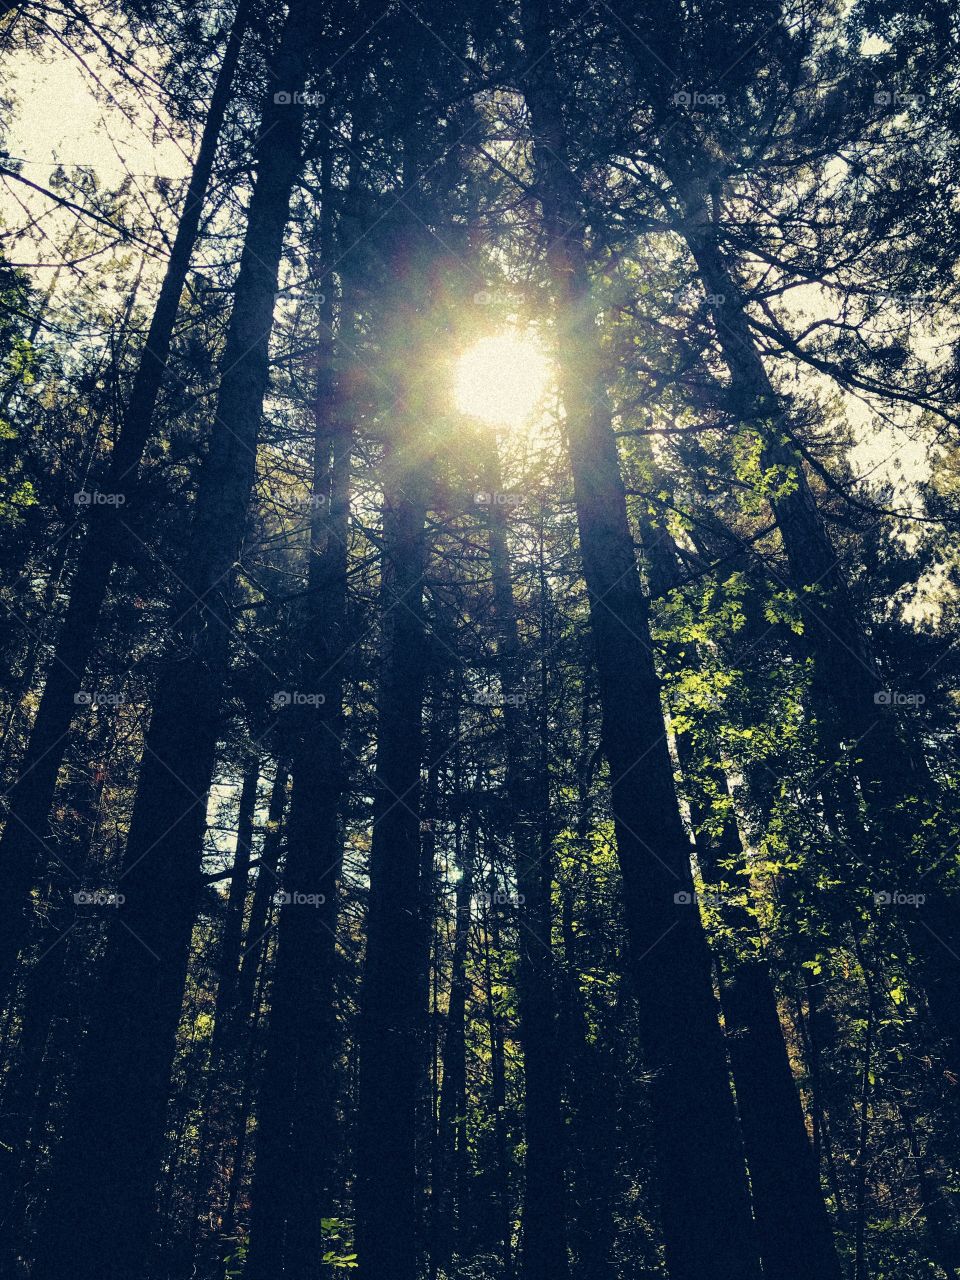 The sun comes through the trees